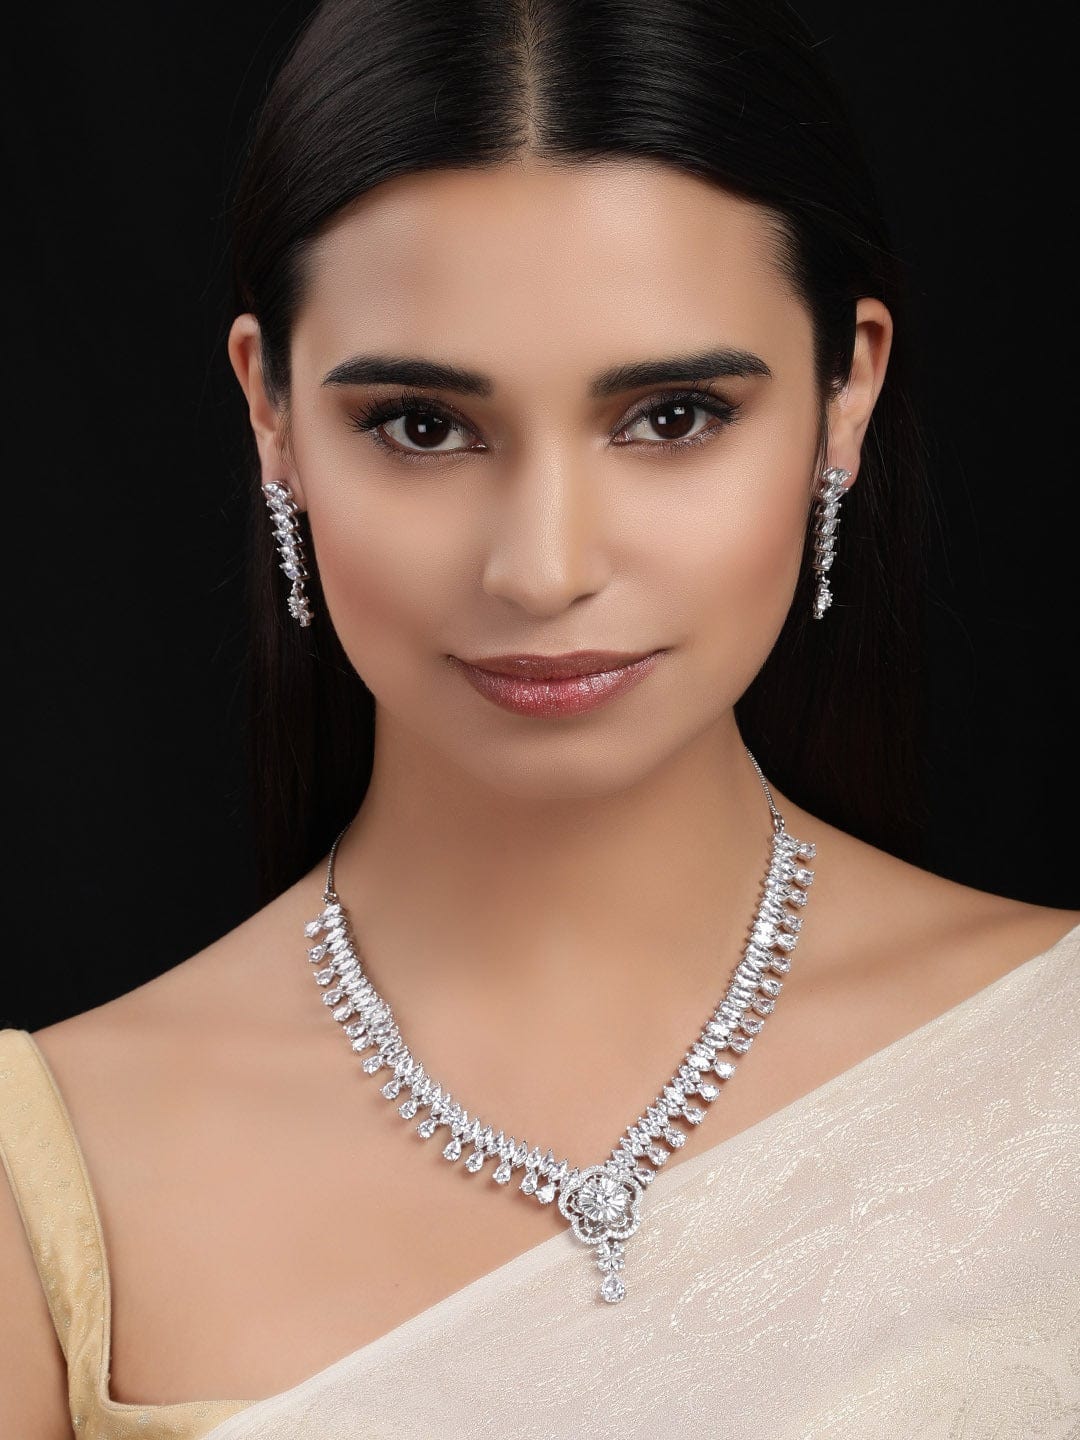 Rubans Silver-Plated White CZ Studded Handcrafted Jewellery Set Necklace Set